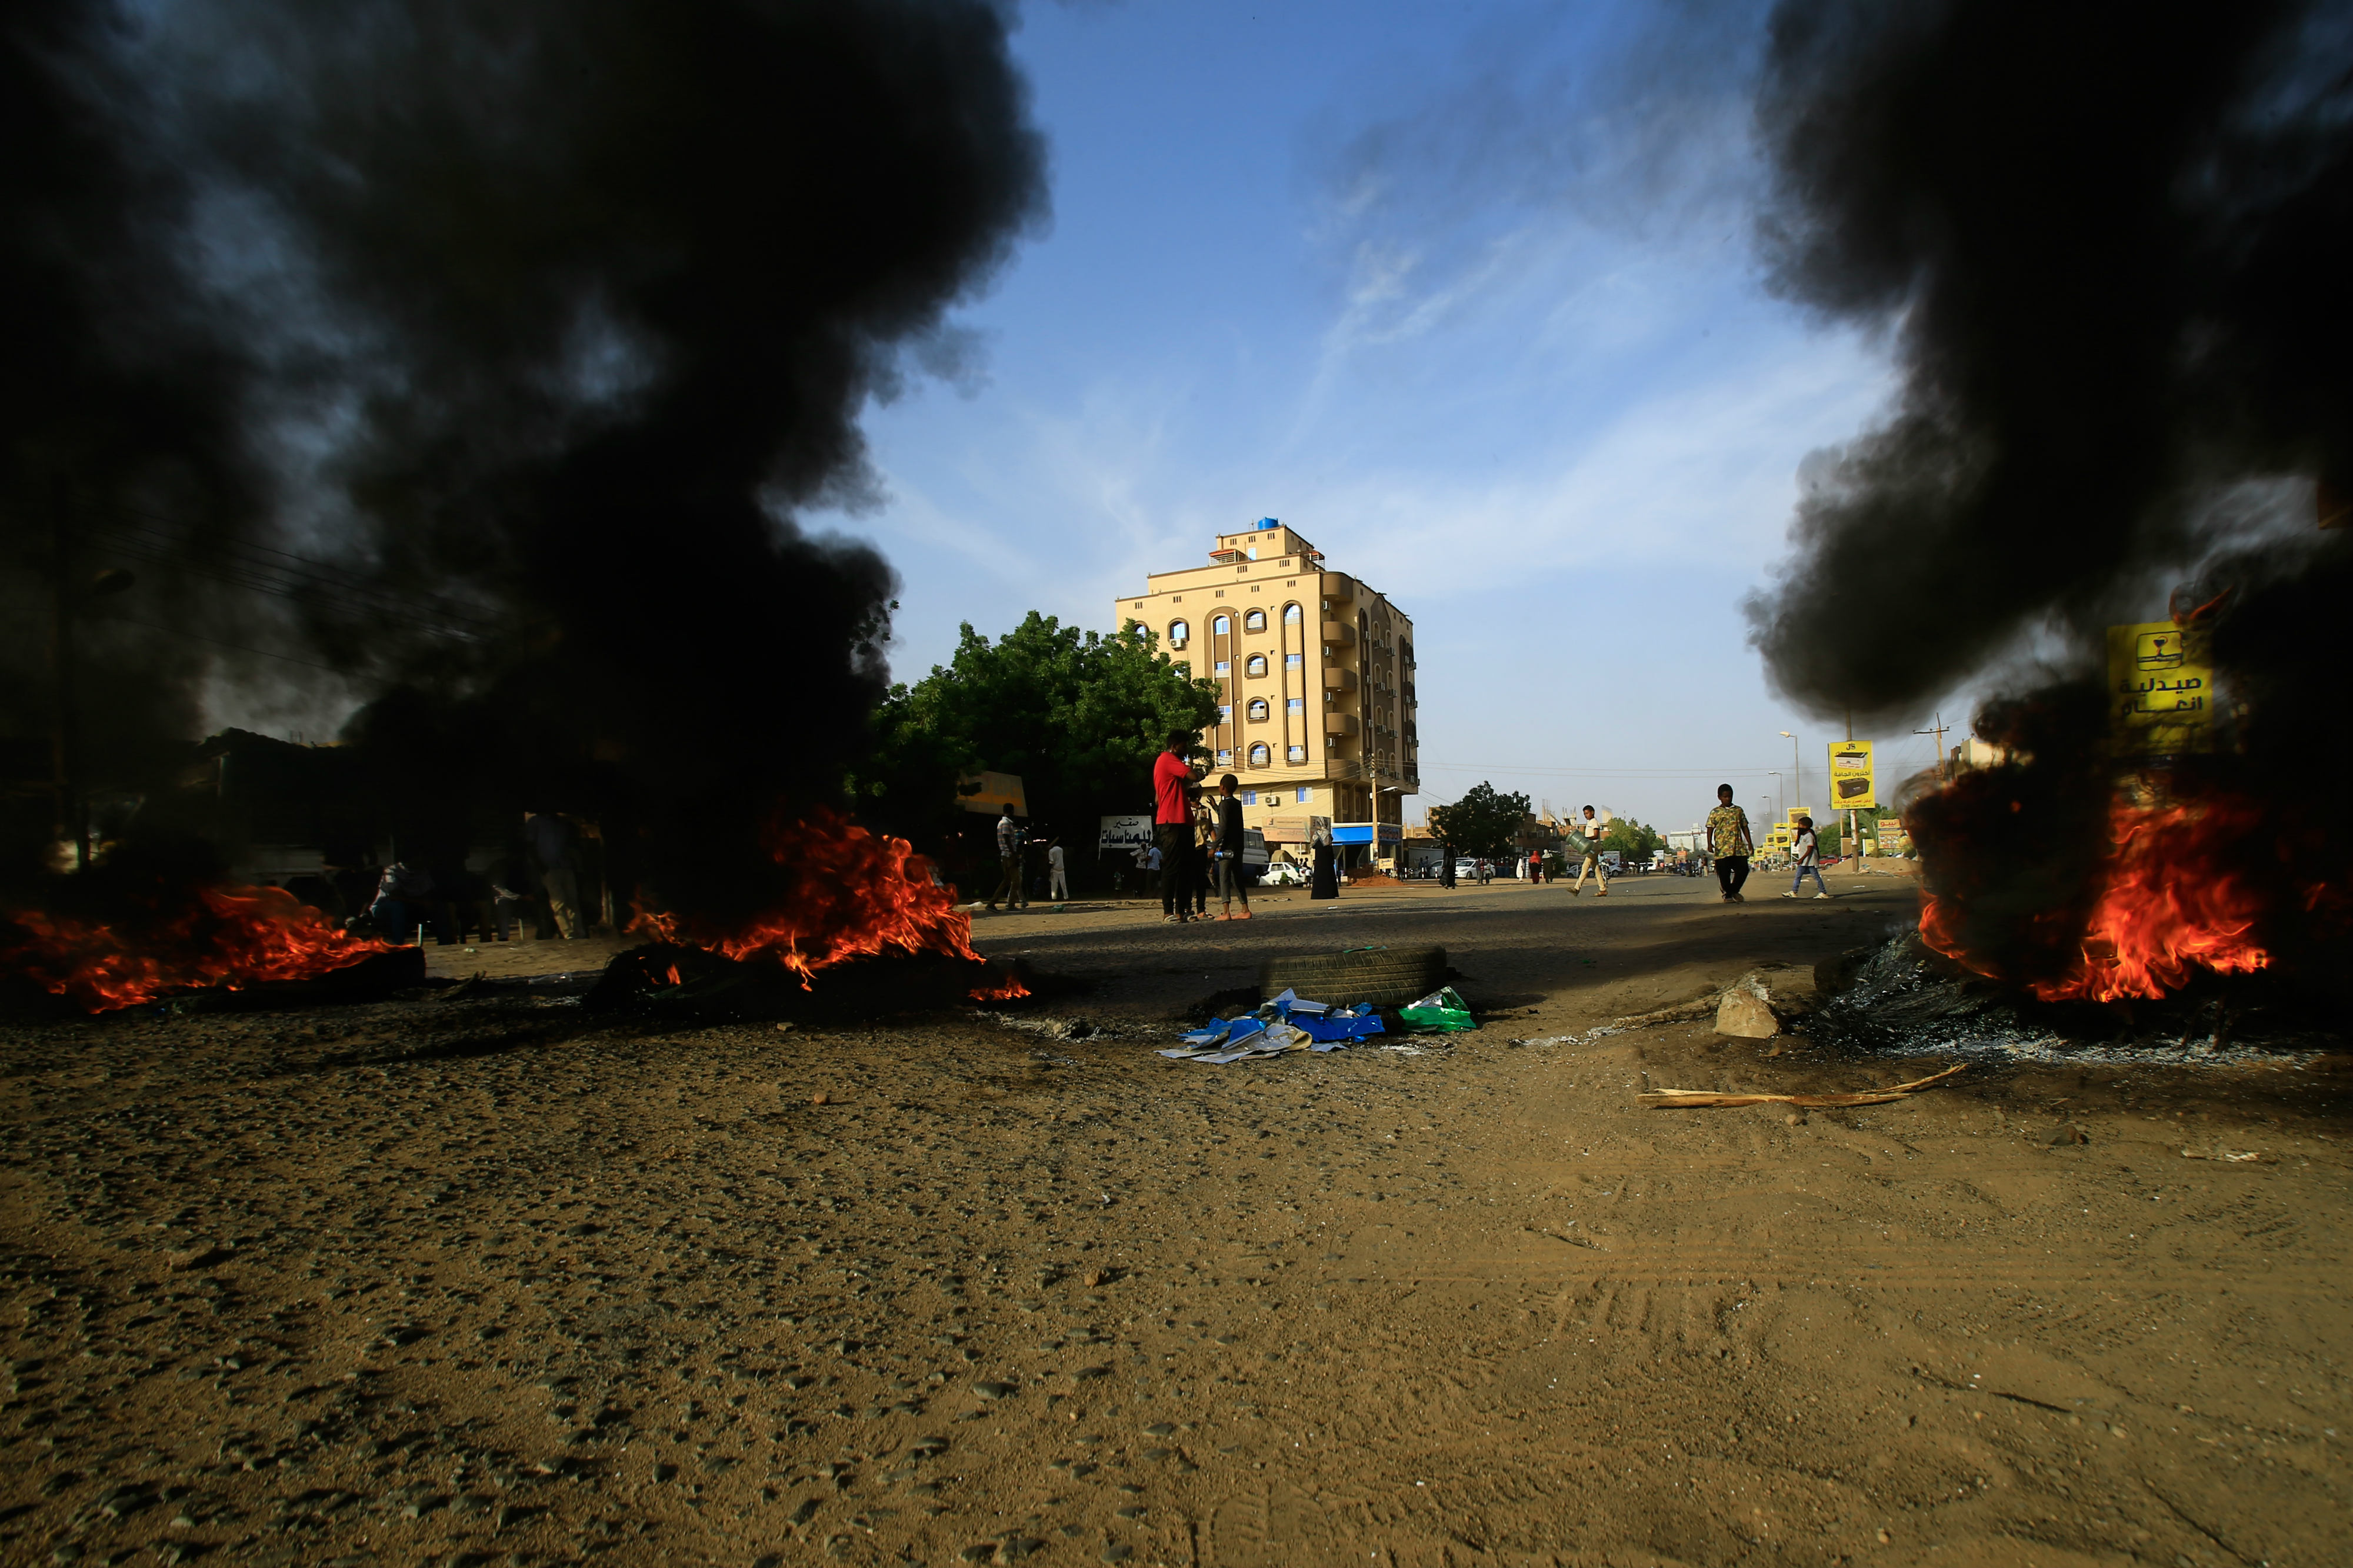 Demonstrators burn tires in the middle of a main street in Khartoum as they protest against the results of the probe into the June raid on a Khartoum protest camp (AFP)